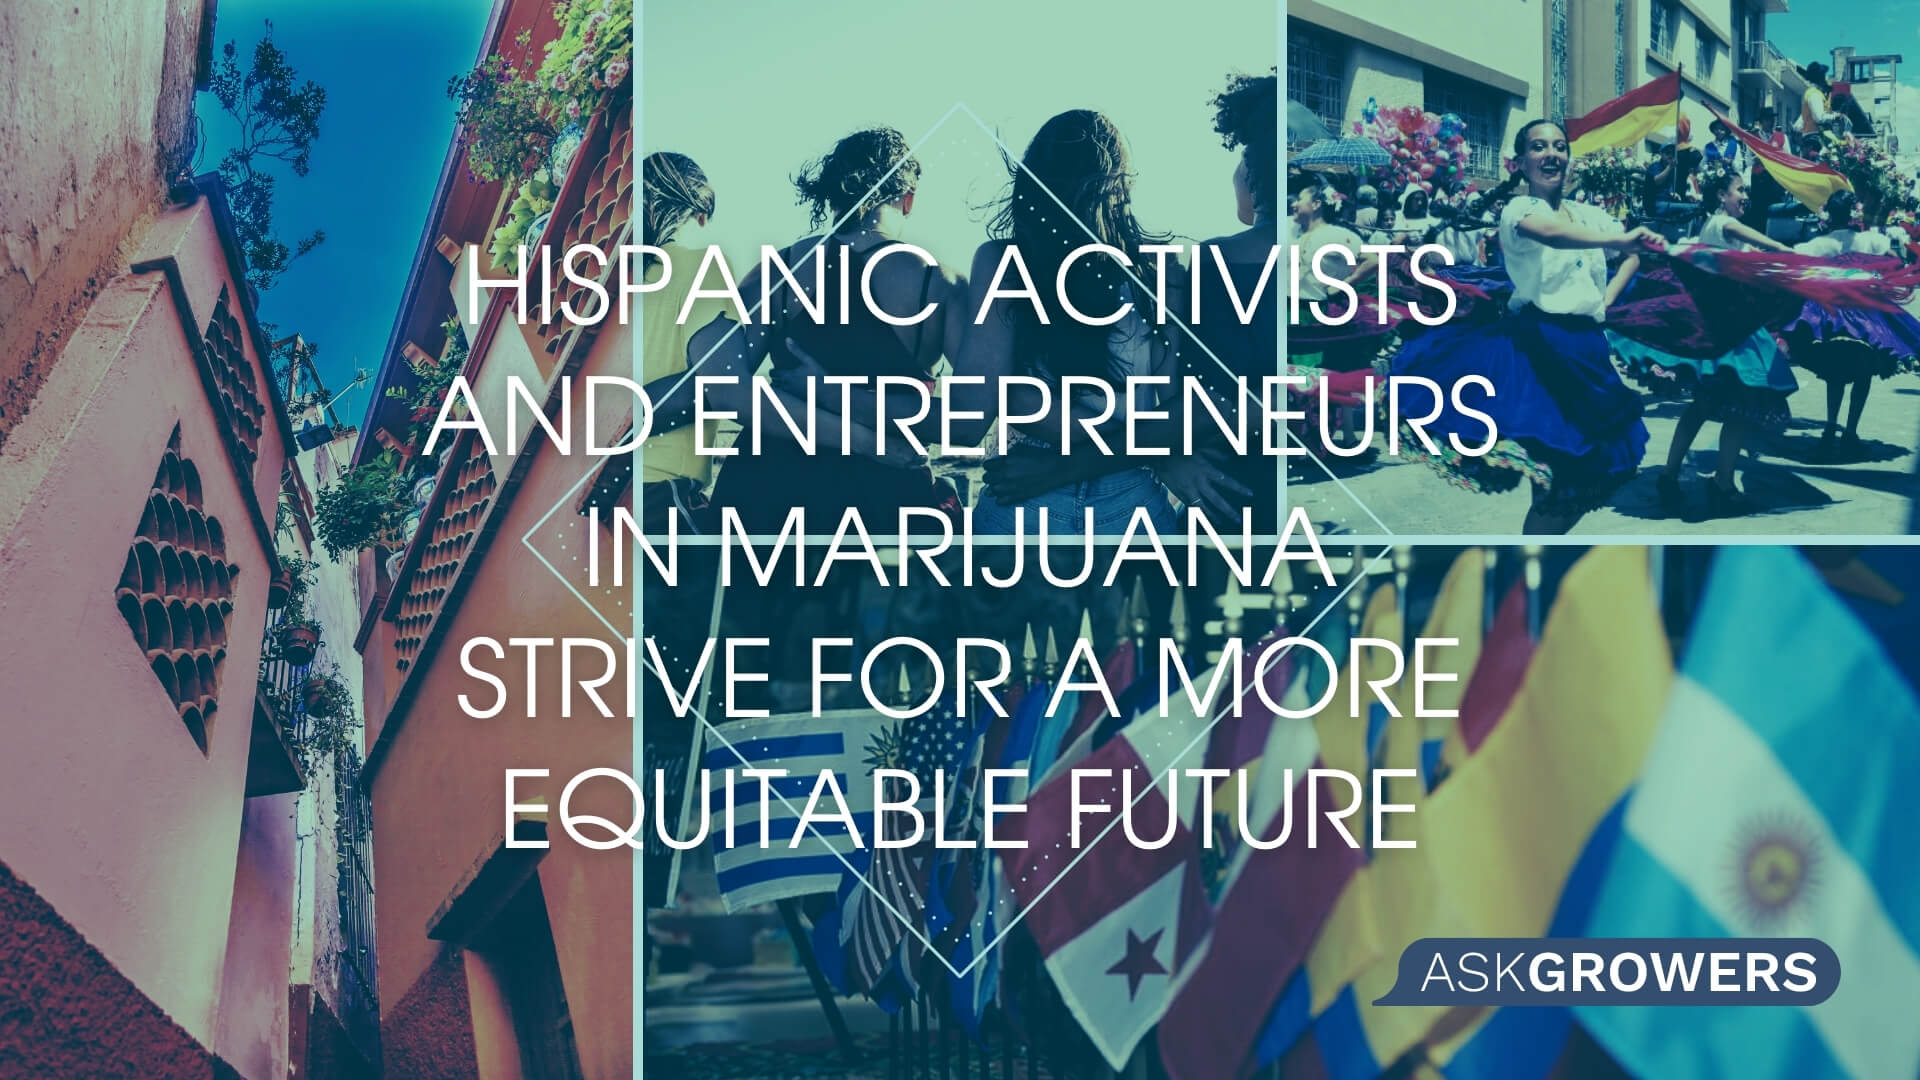 Hispanic Activists and Entrepreneurs in Marijuana Strive for a More Equitable Future